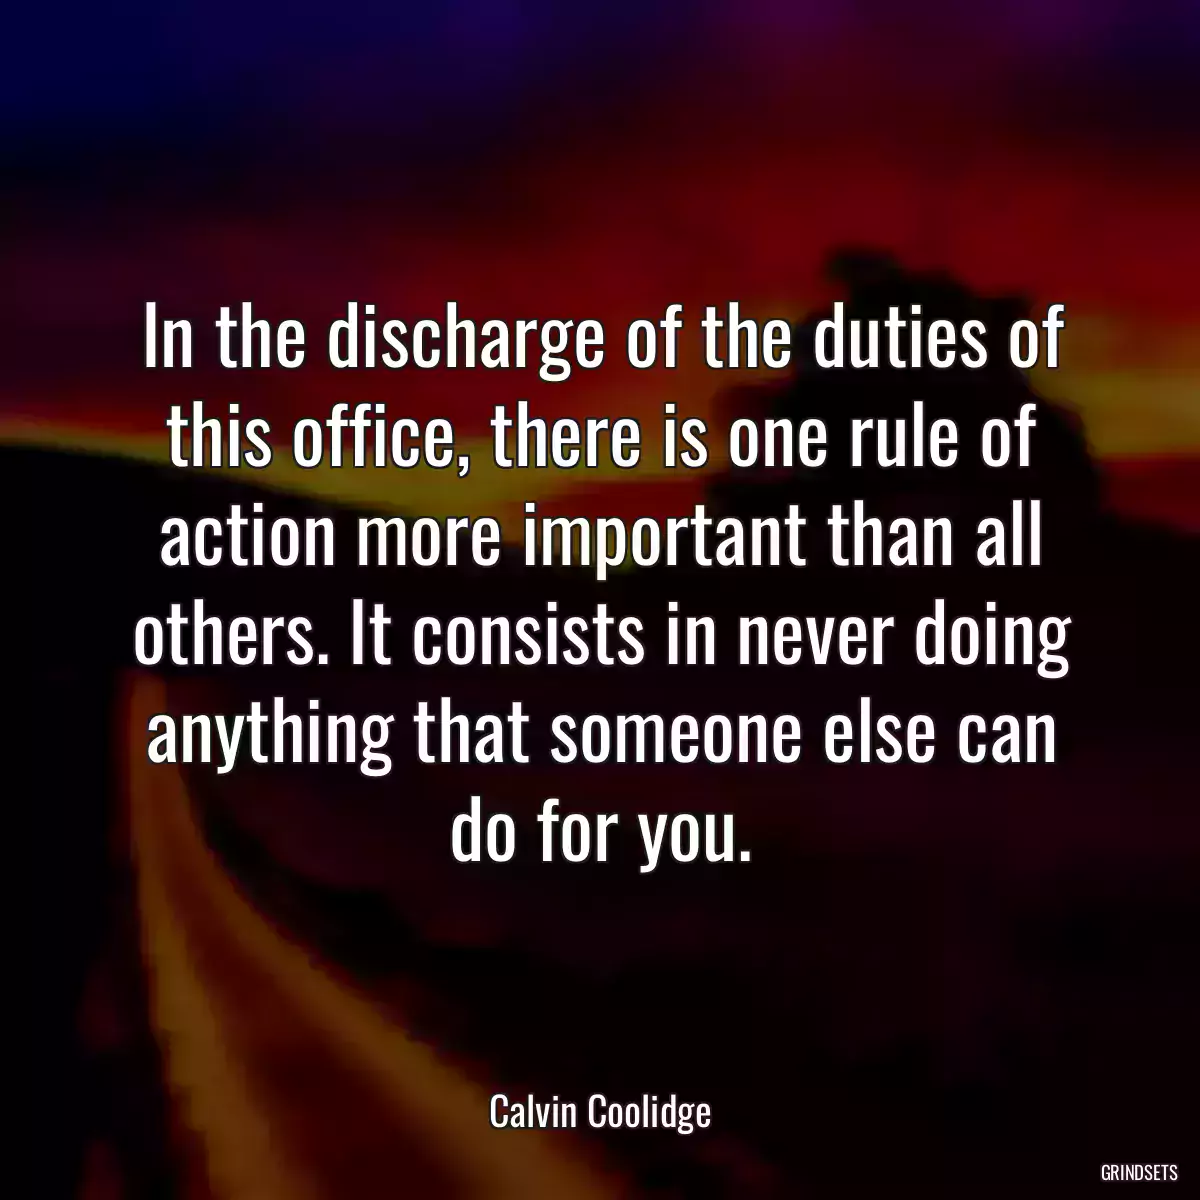 In the discharge of the duties of this office, there is one rule of action more important than all others. It consists in never doing anything that someone else can do for you.